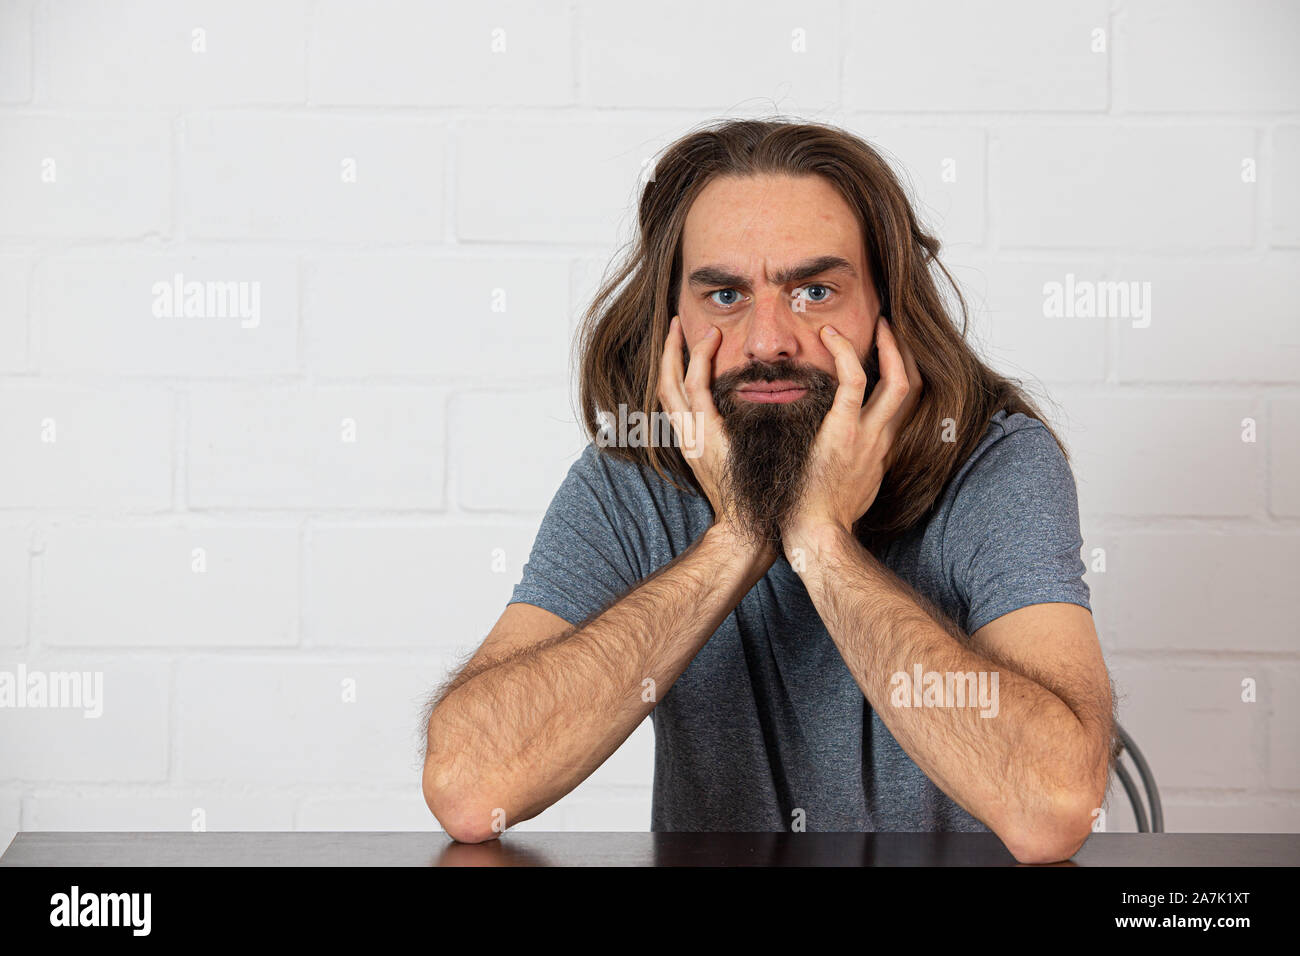 frustrated young man Stock Photo